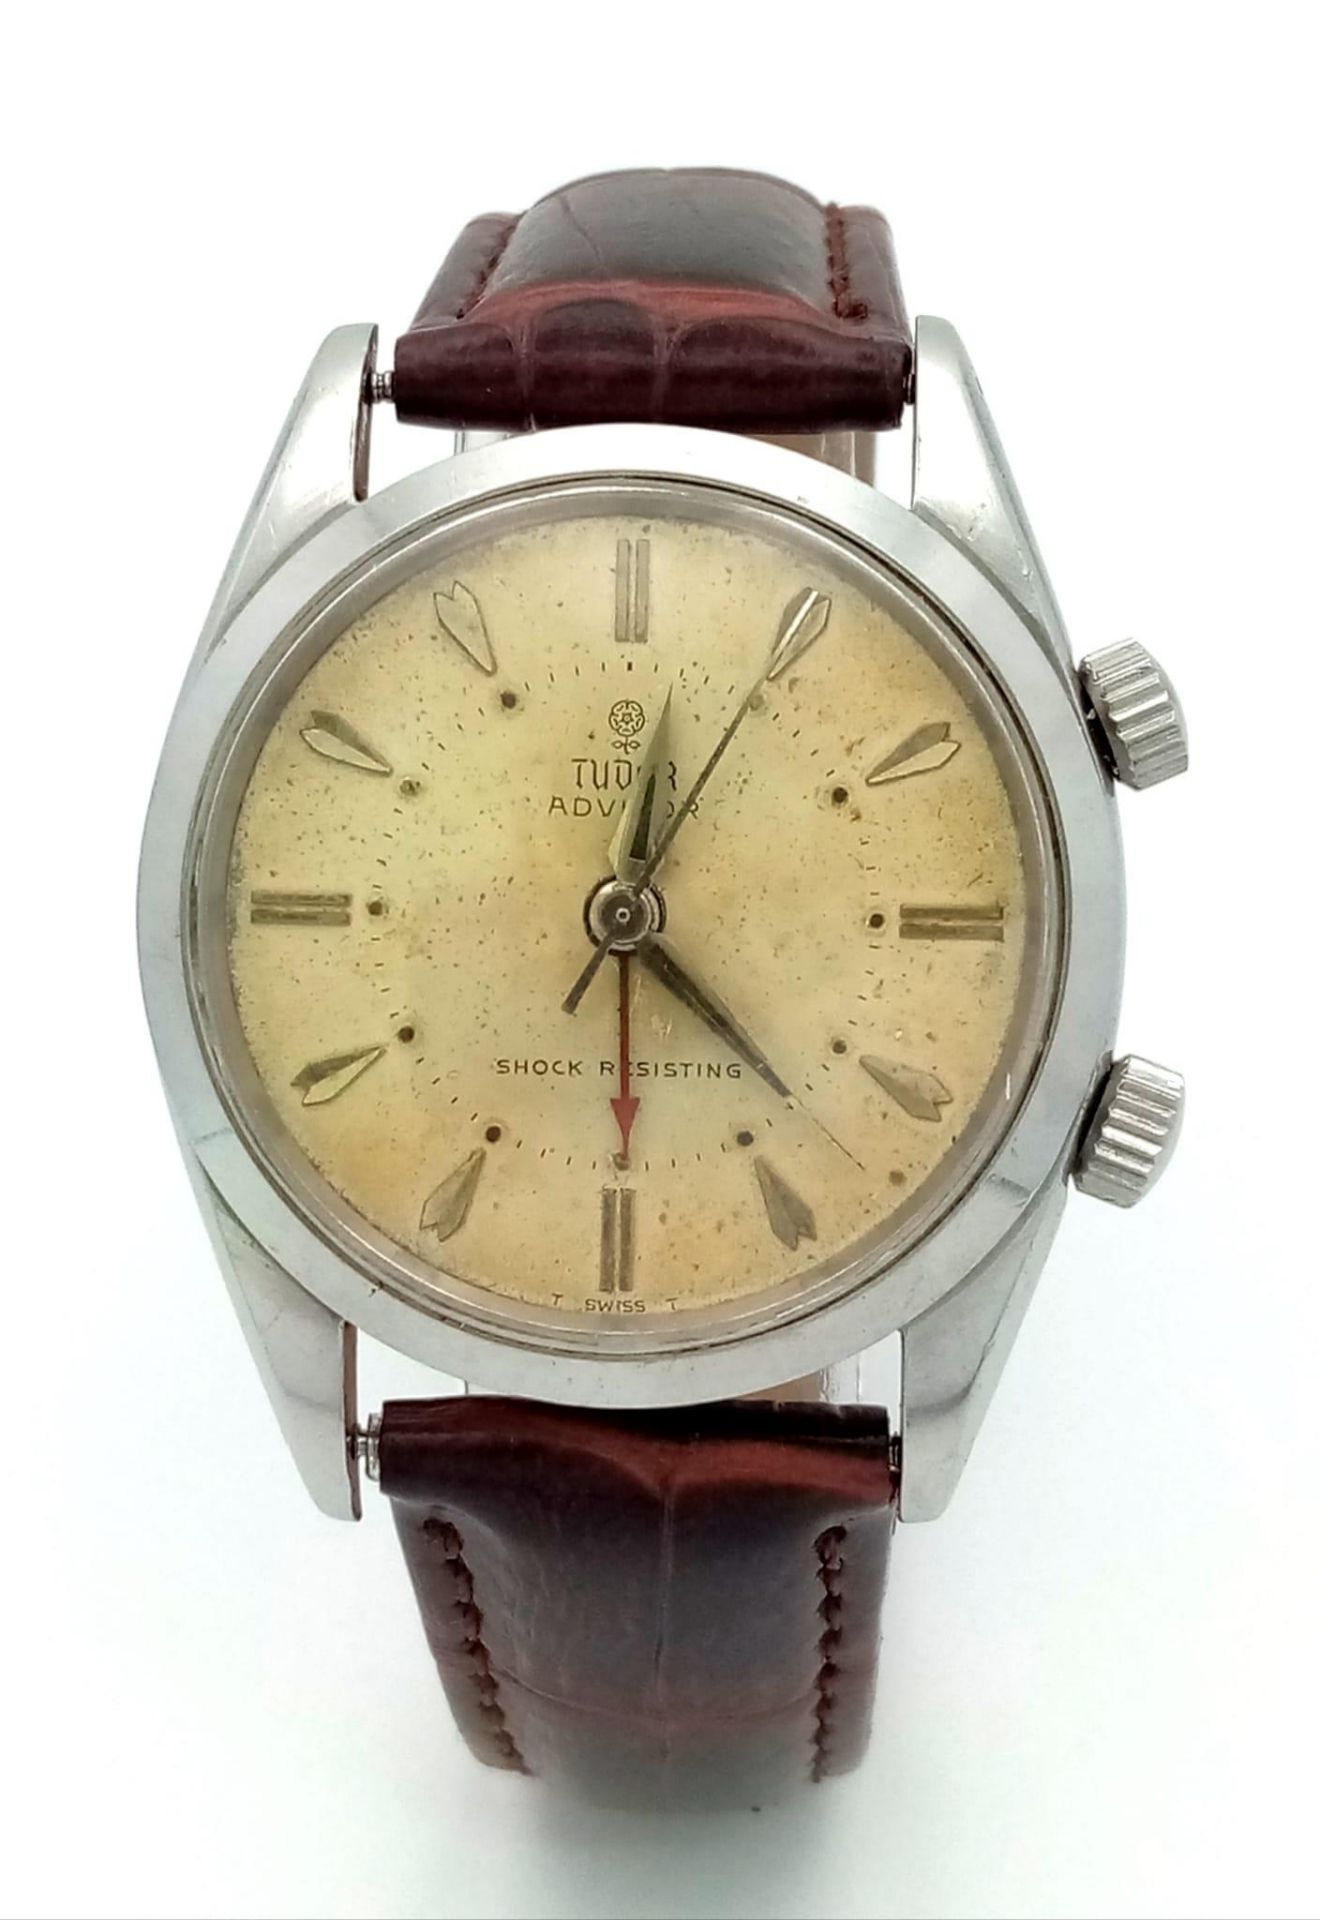 A Very Rare (1950s) Tudor Advisor Alarm Gents Watch. Brown leather strap. Steel case - 34mm. Gilt - Image 2 of 5